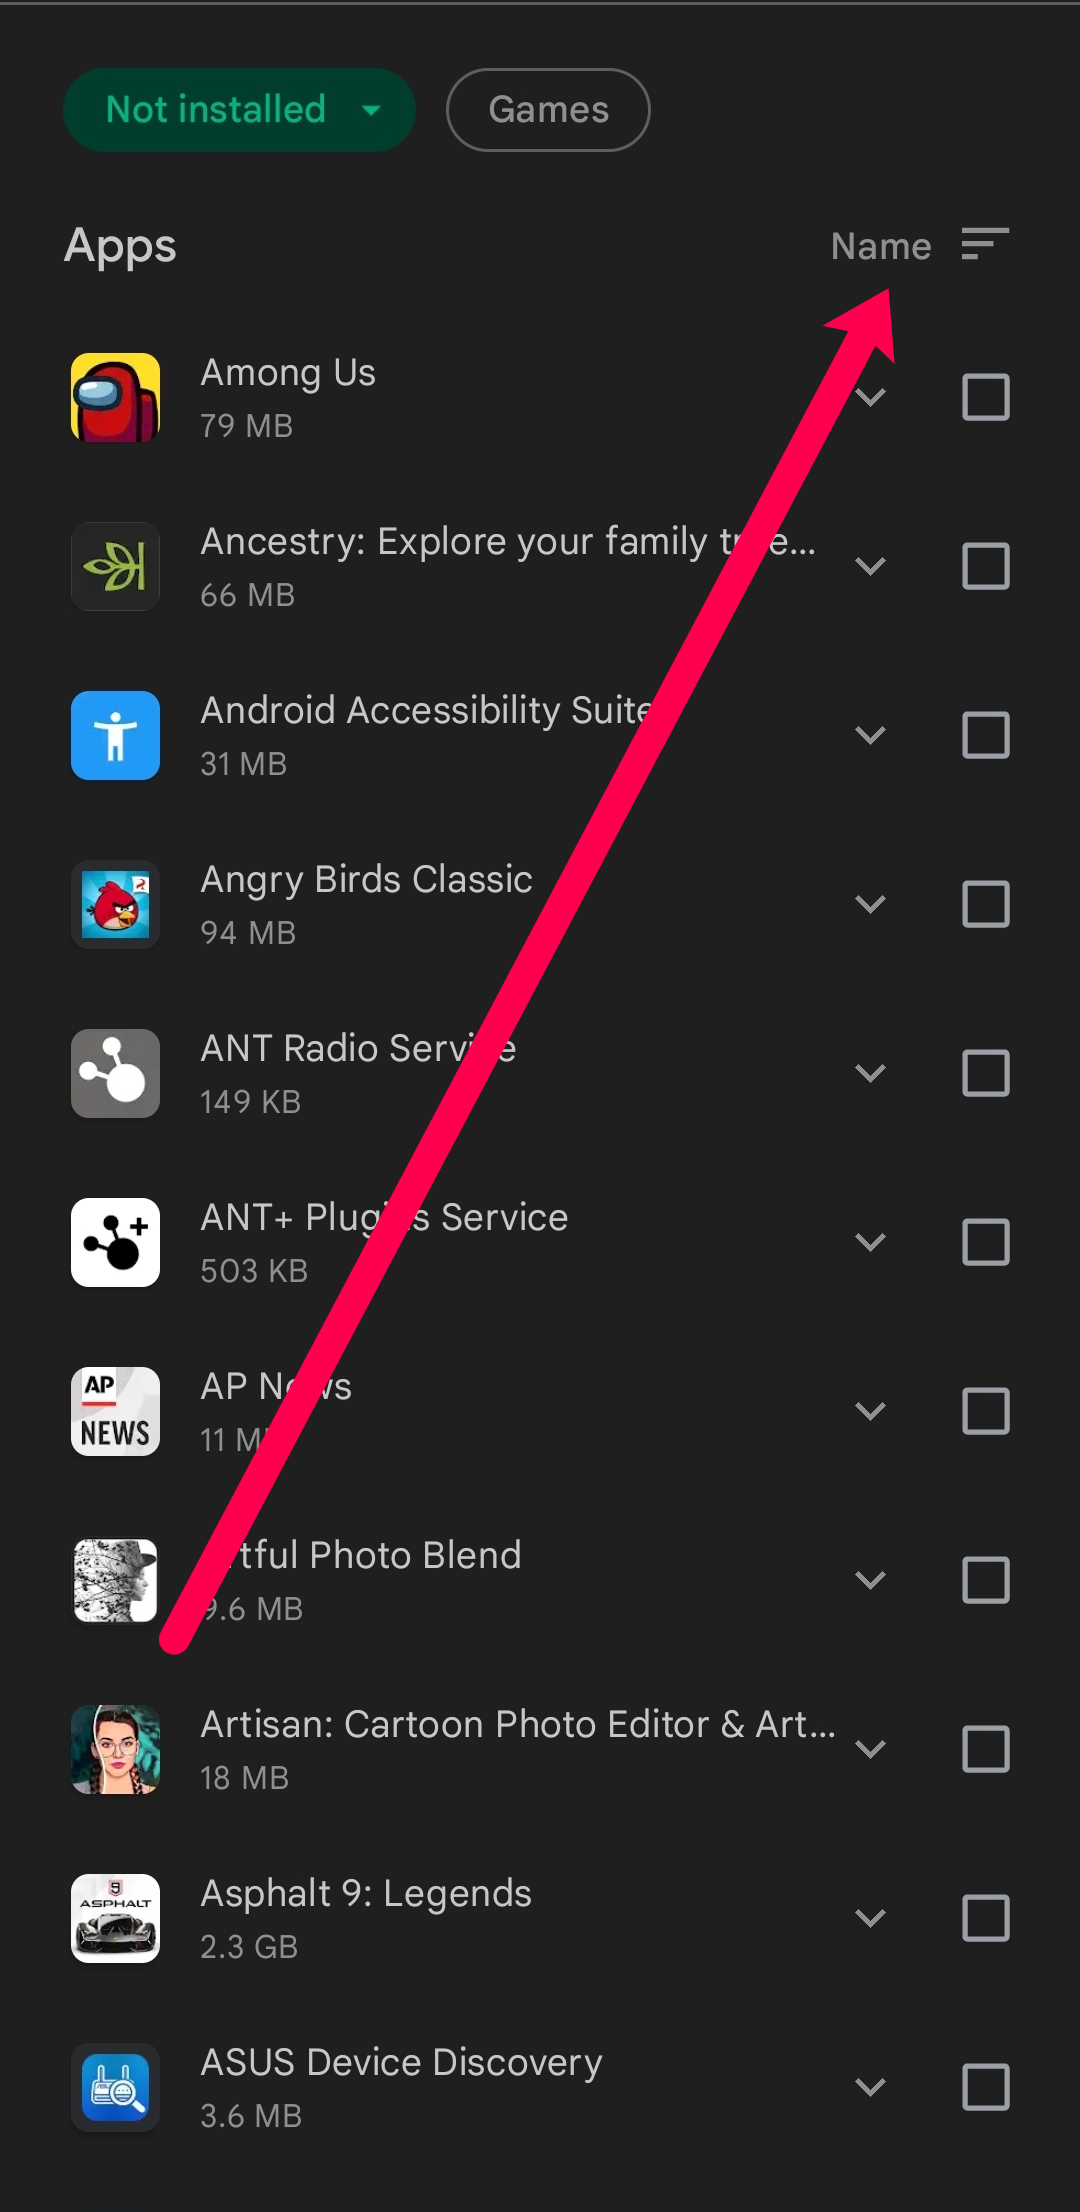 How do I recover deleted apps on my phone?